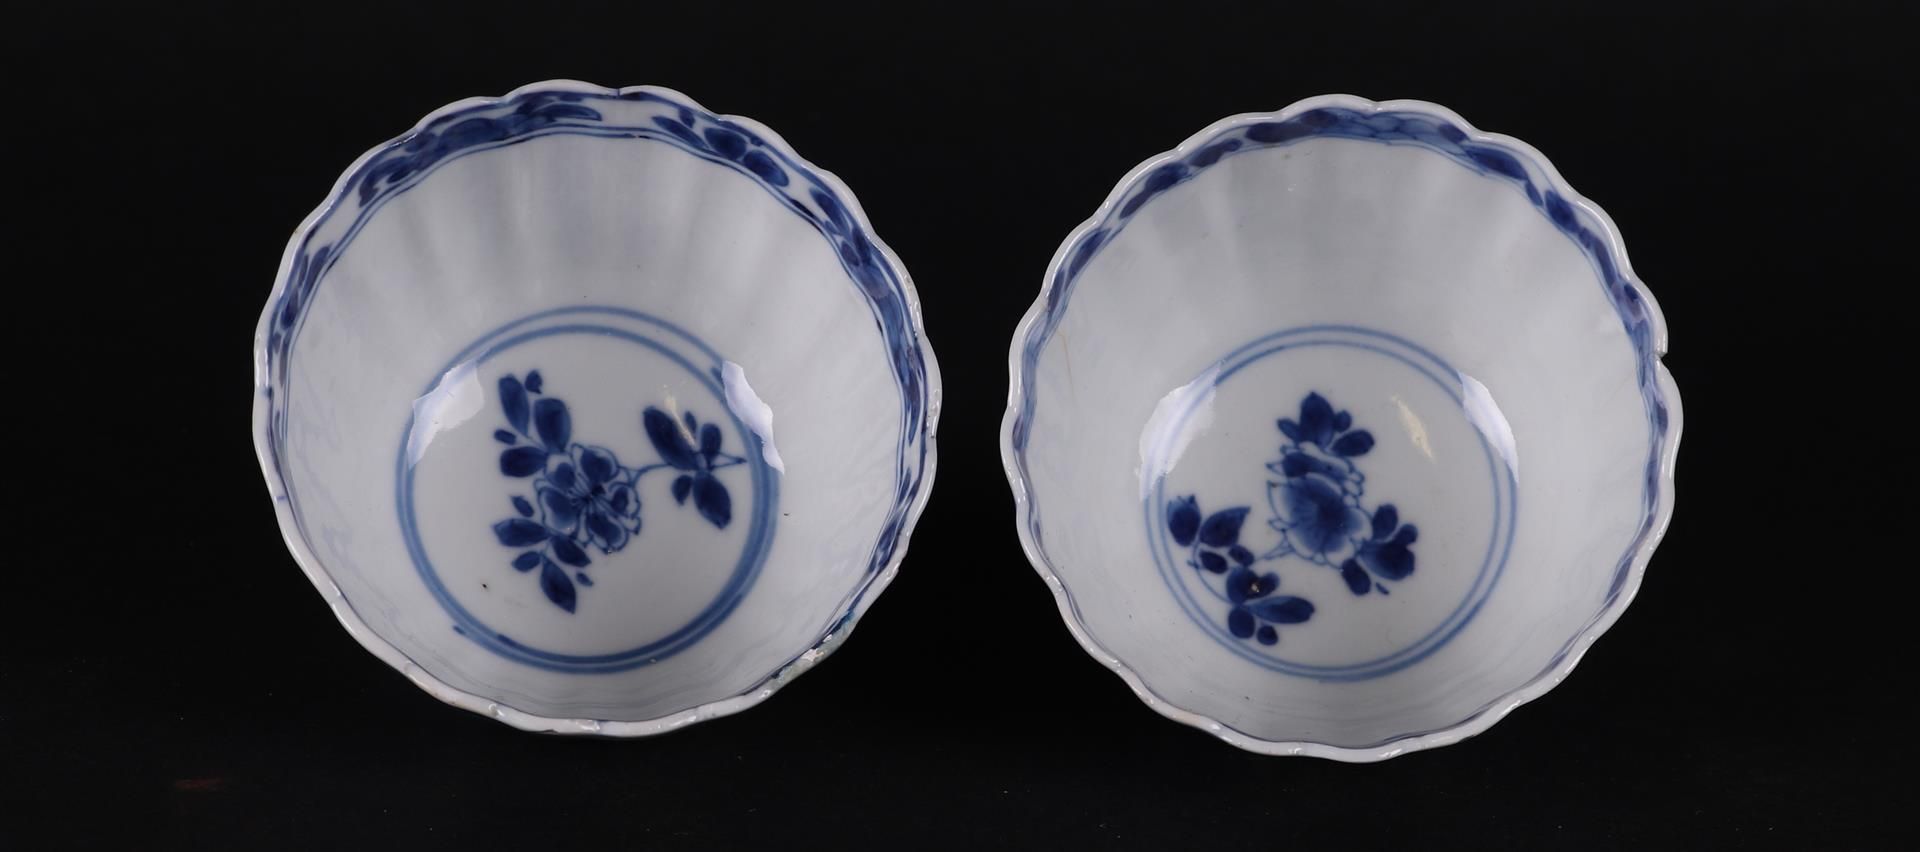 Two ribbed porcelain bowls with rich floral decoration in borders, both marked on the bottom. - Image 2 of 3